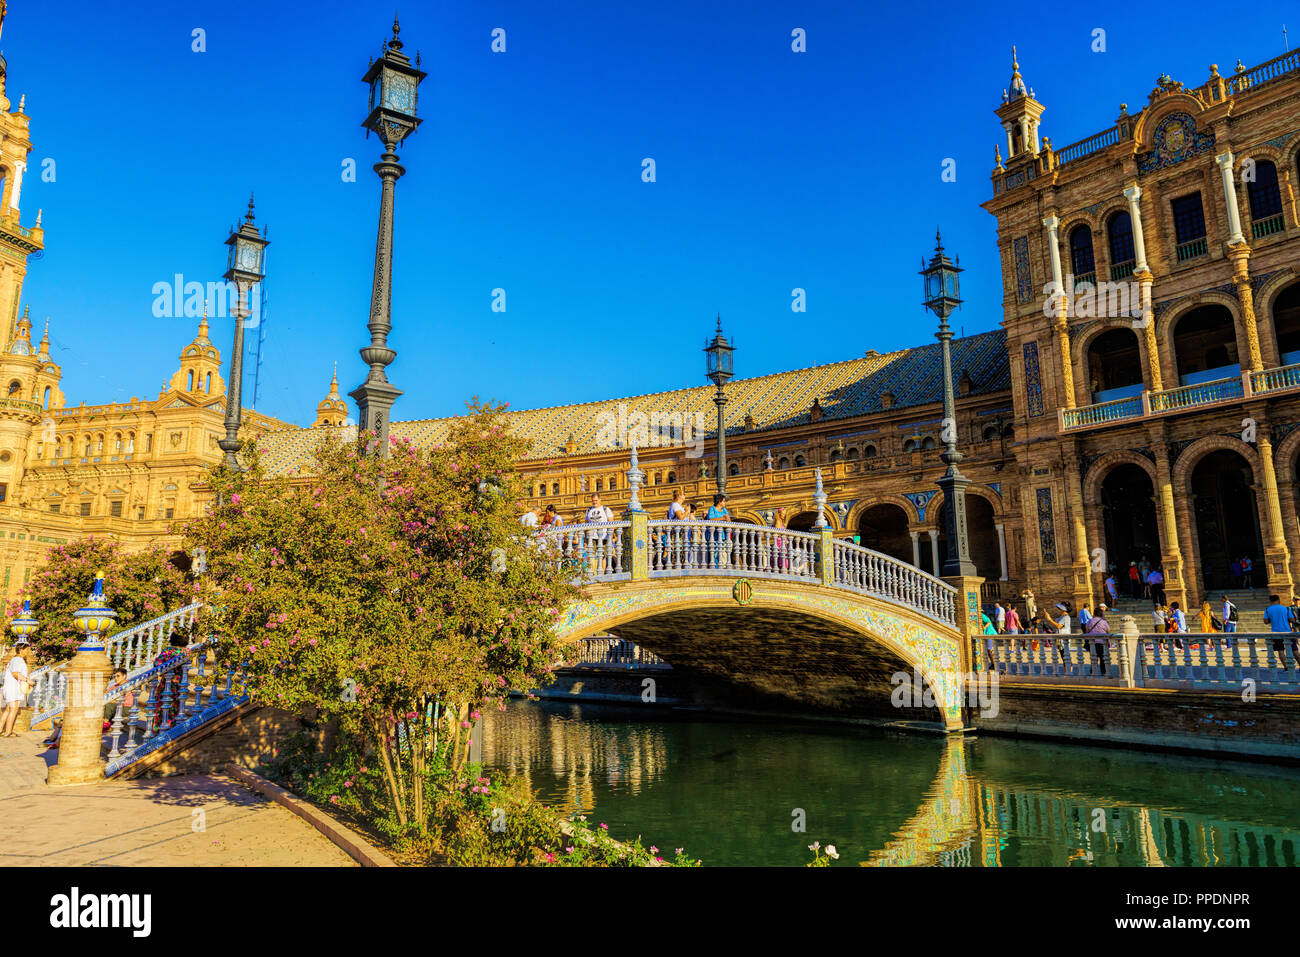 The Plaza de Espana is a plaza in the Parque de Maria Luisa, in Seville, Spain, built in 1928 for the Ibero-American Exposition of 1929 Stock Photo